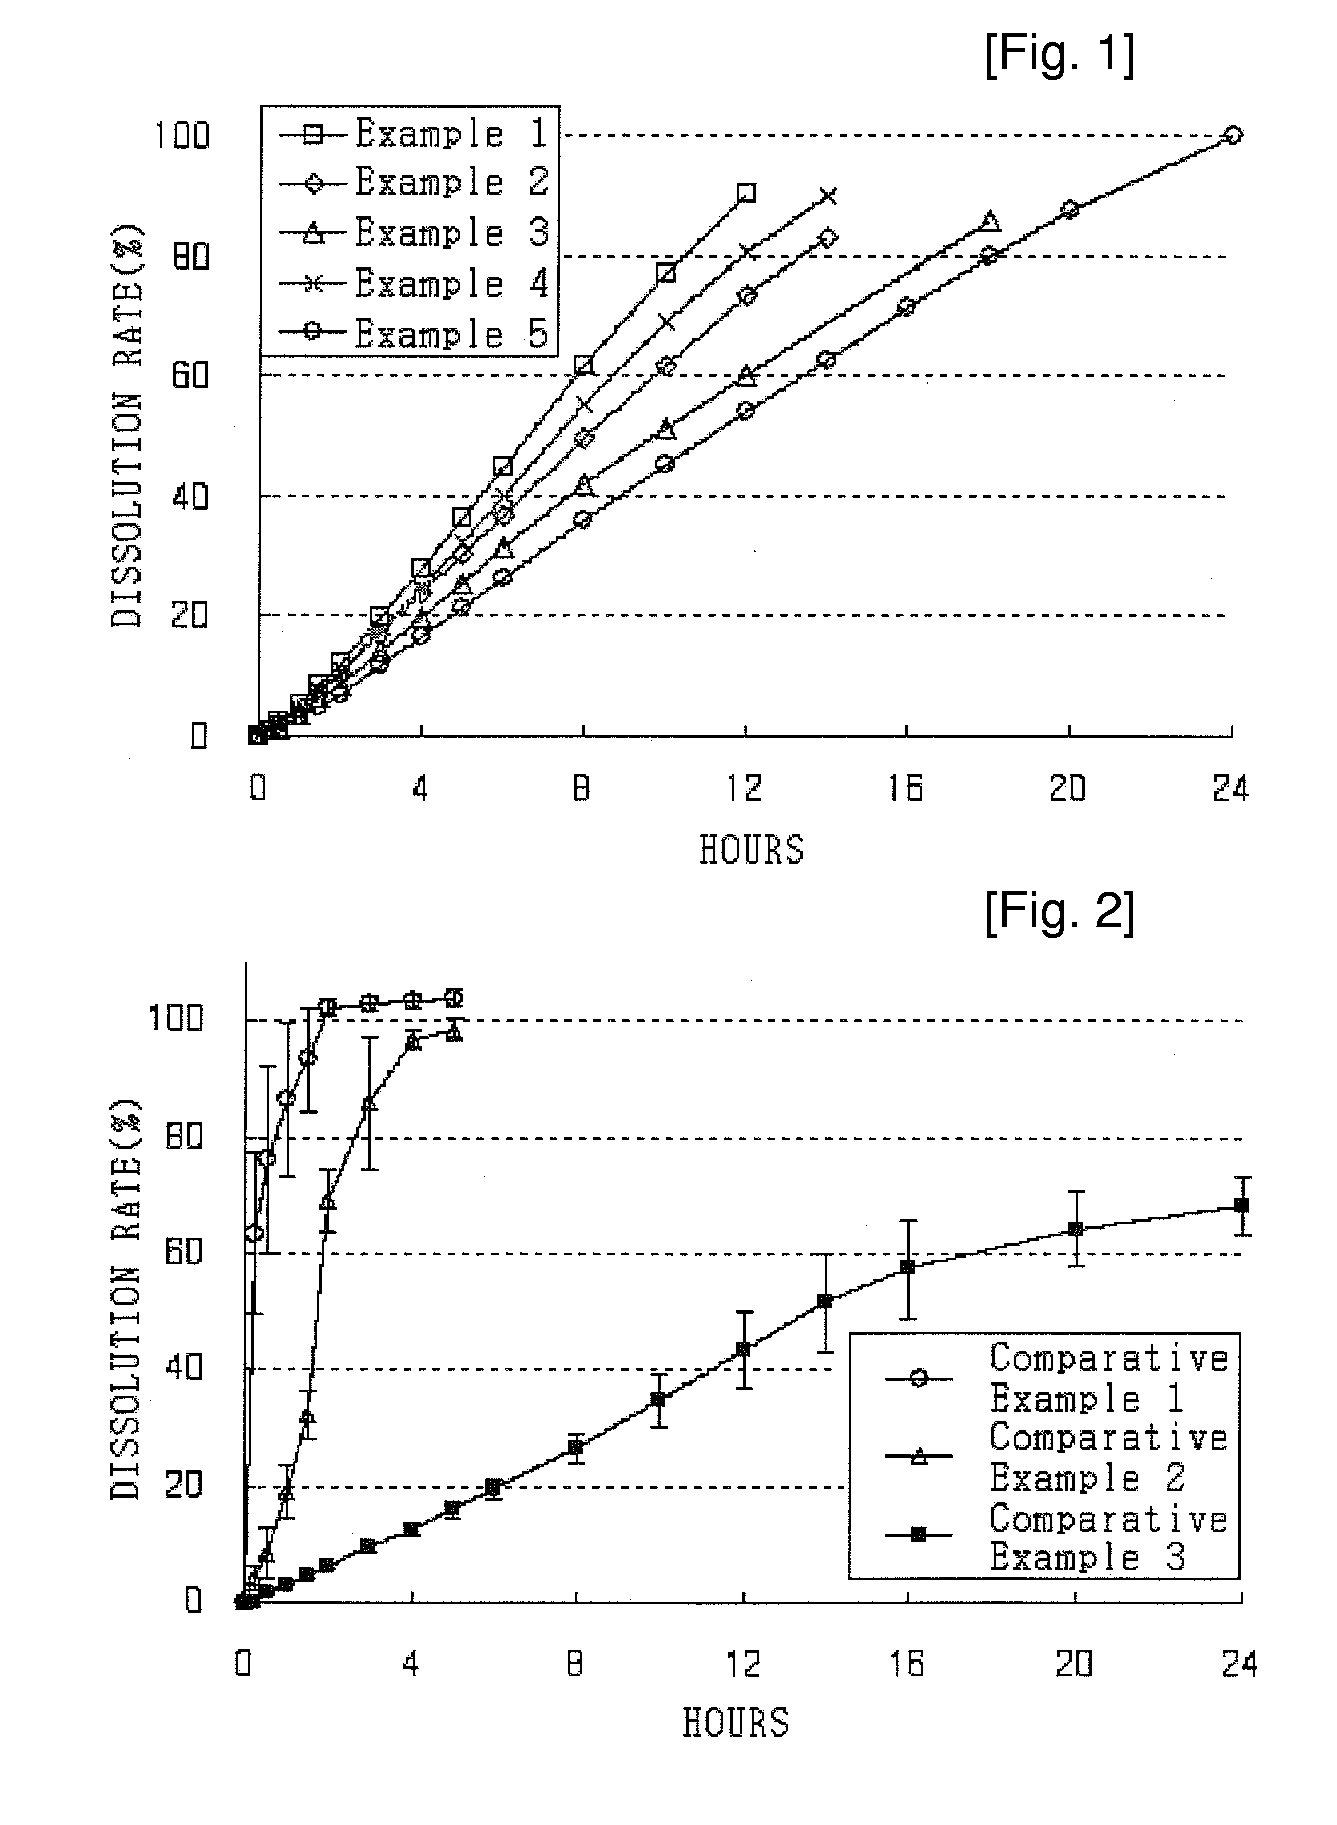 Sustained-release tablet containing doxazosin mesylate